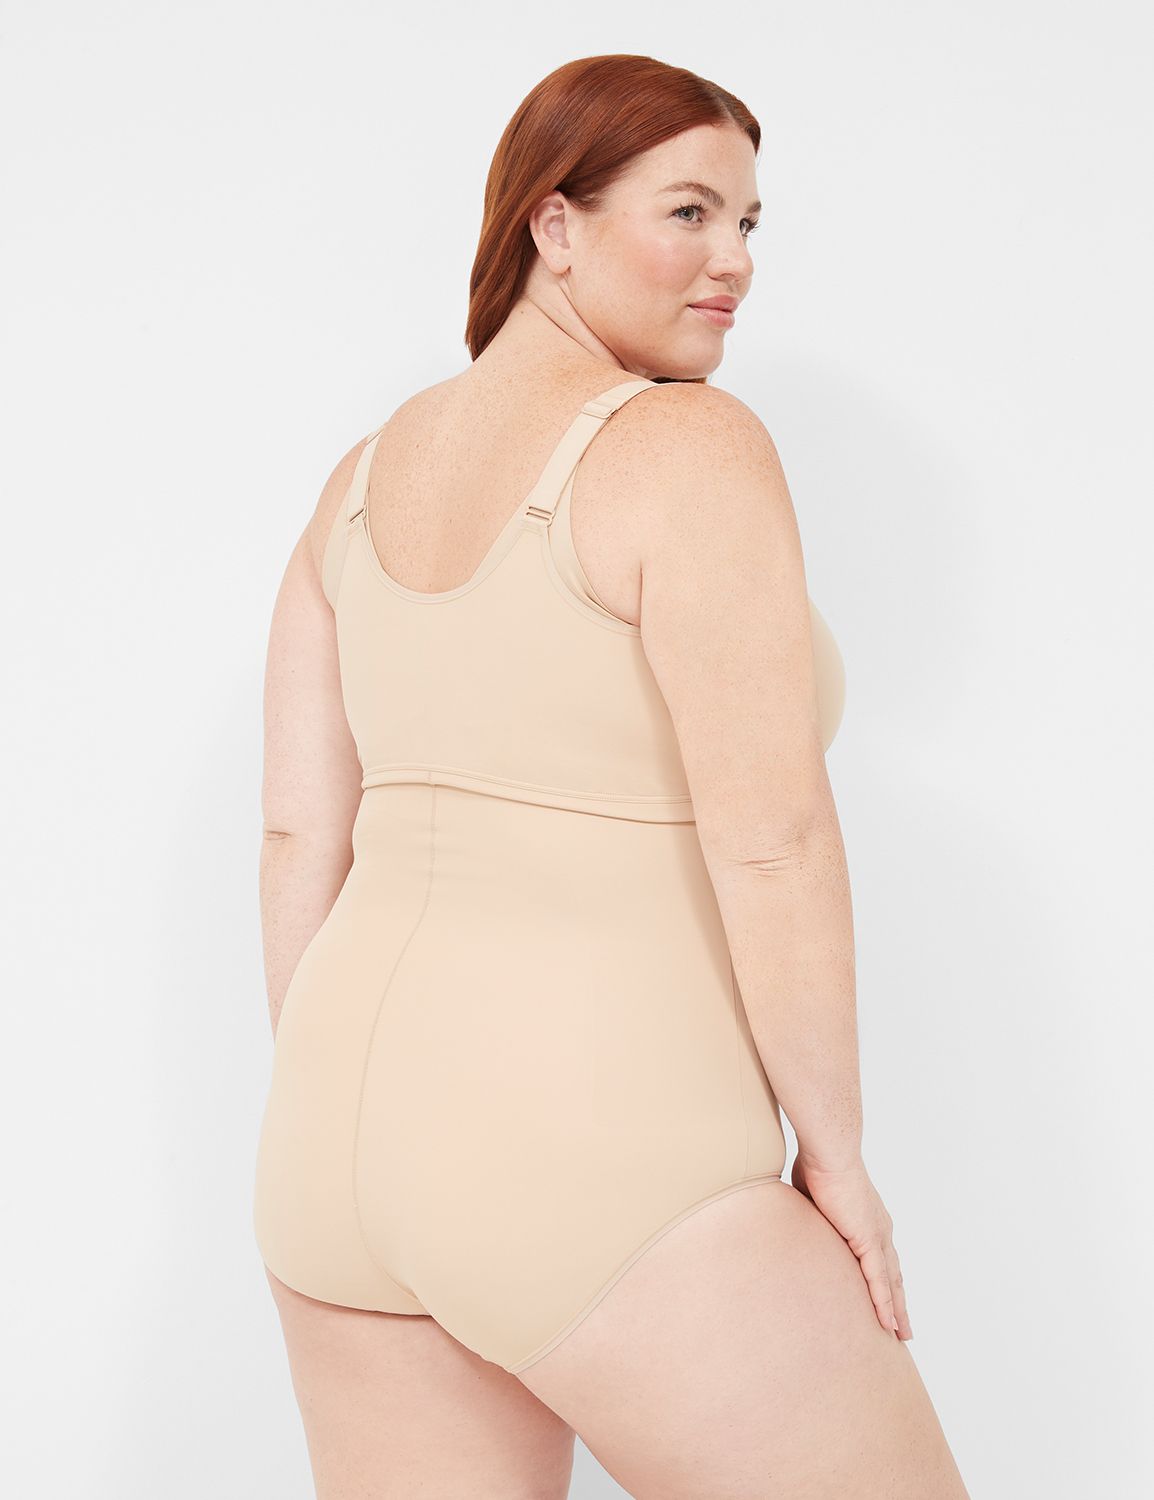 Shapewear By Cacique Open-Bust Shaper Level 3 maximum body contouring Size  22/24